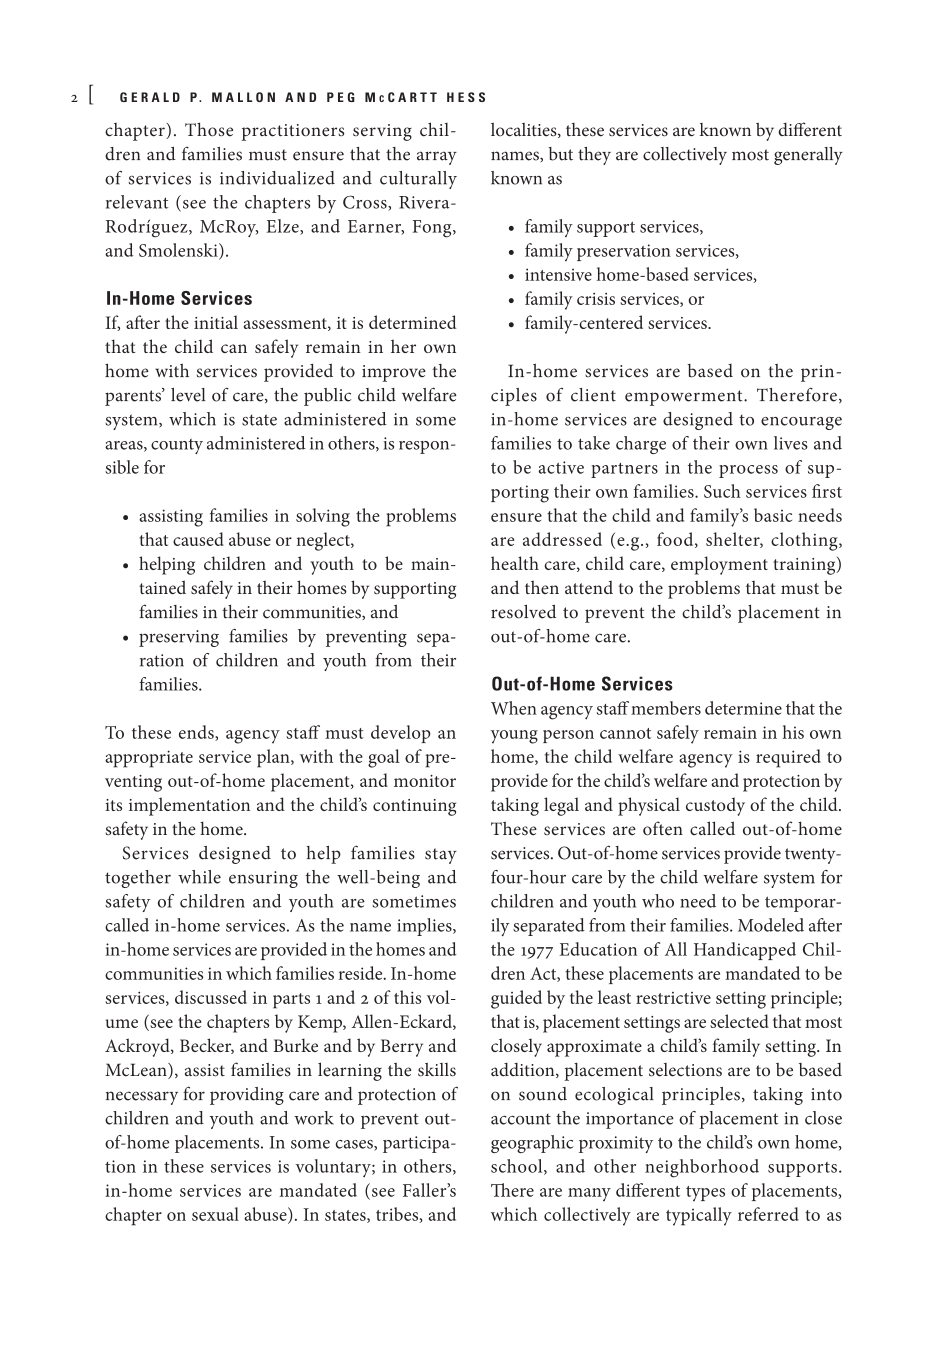 Child Welfare for the Twenty-first Century: A Handbook of Practices, Policies, and Programs, second edition page 2